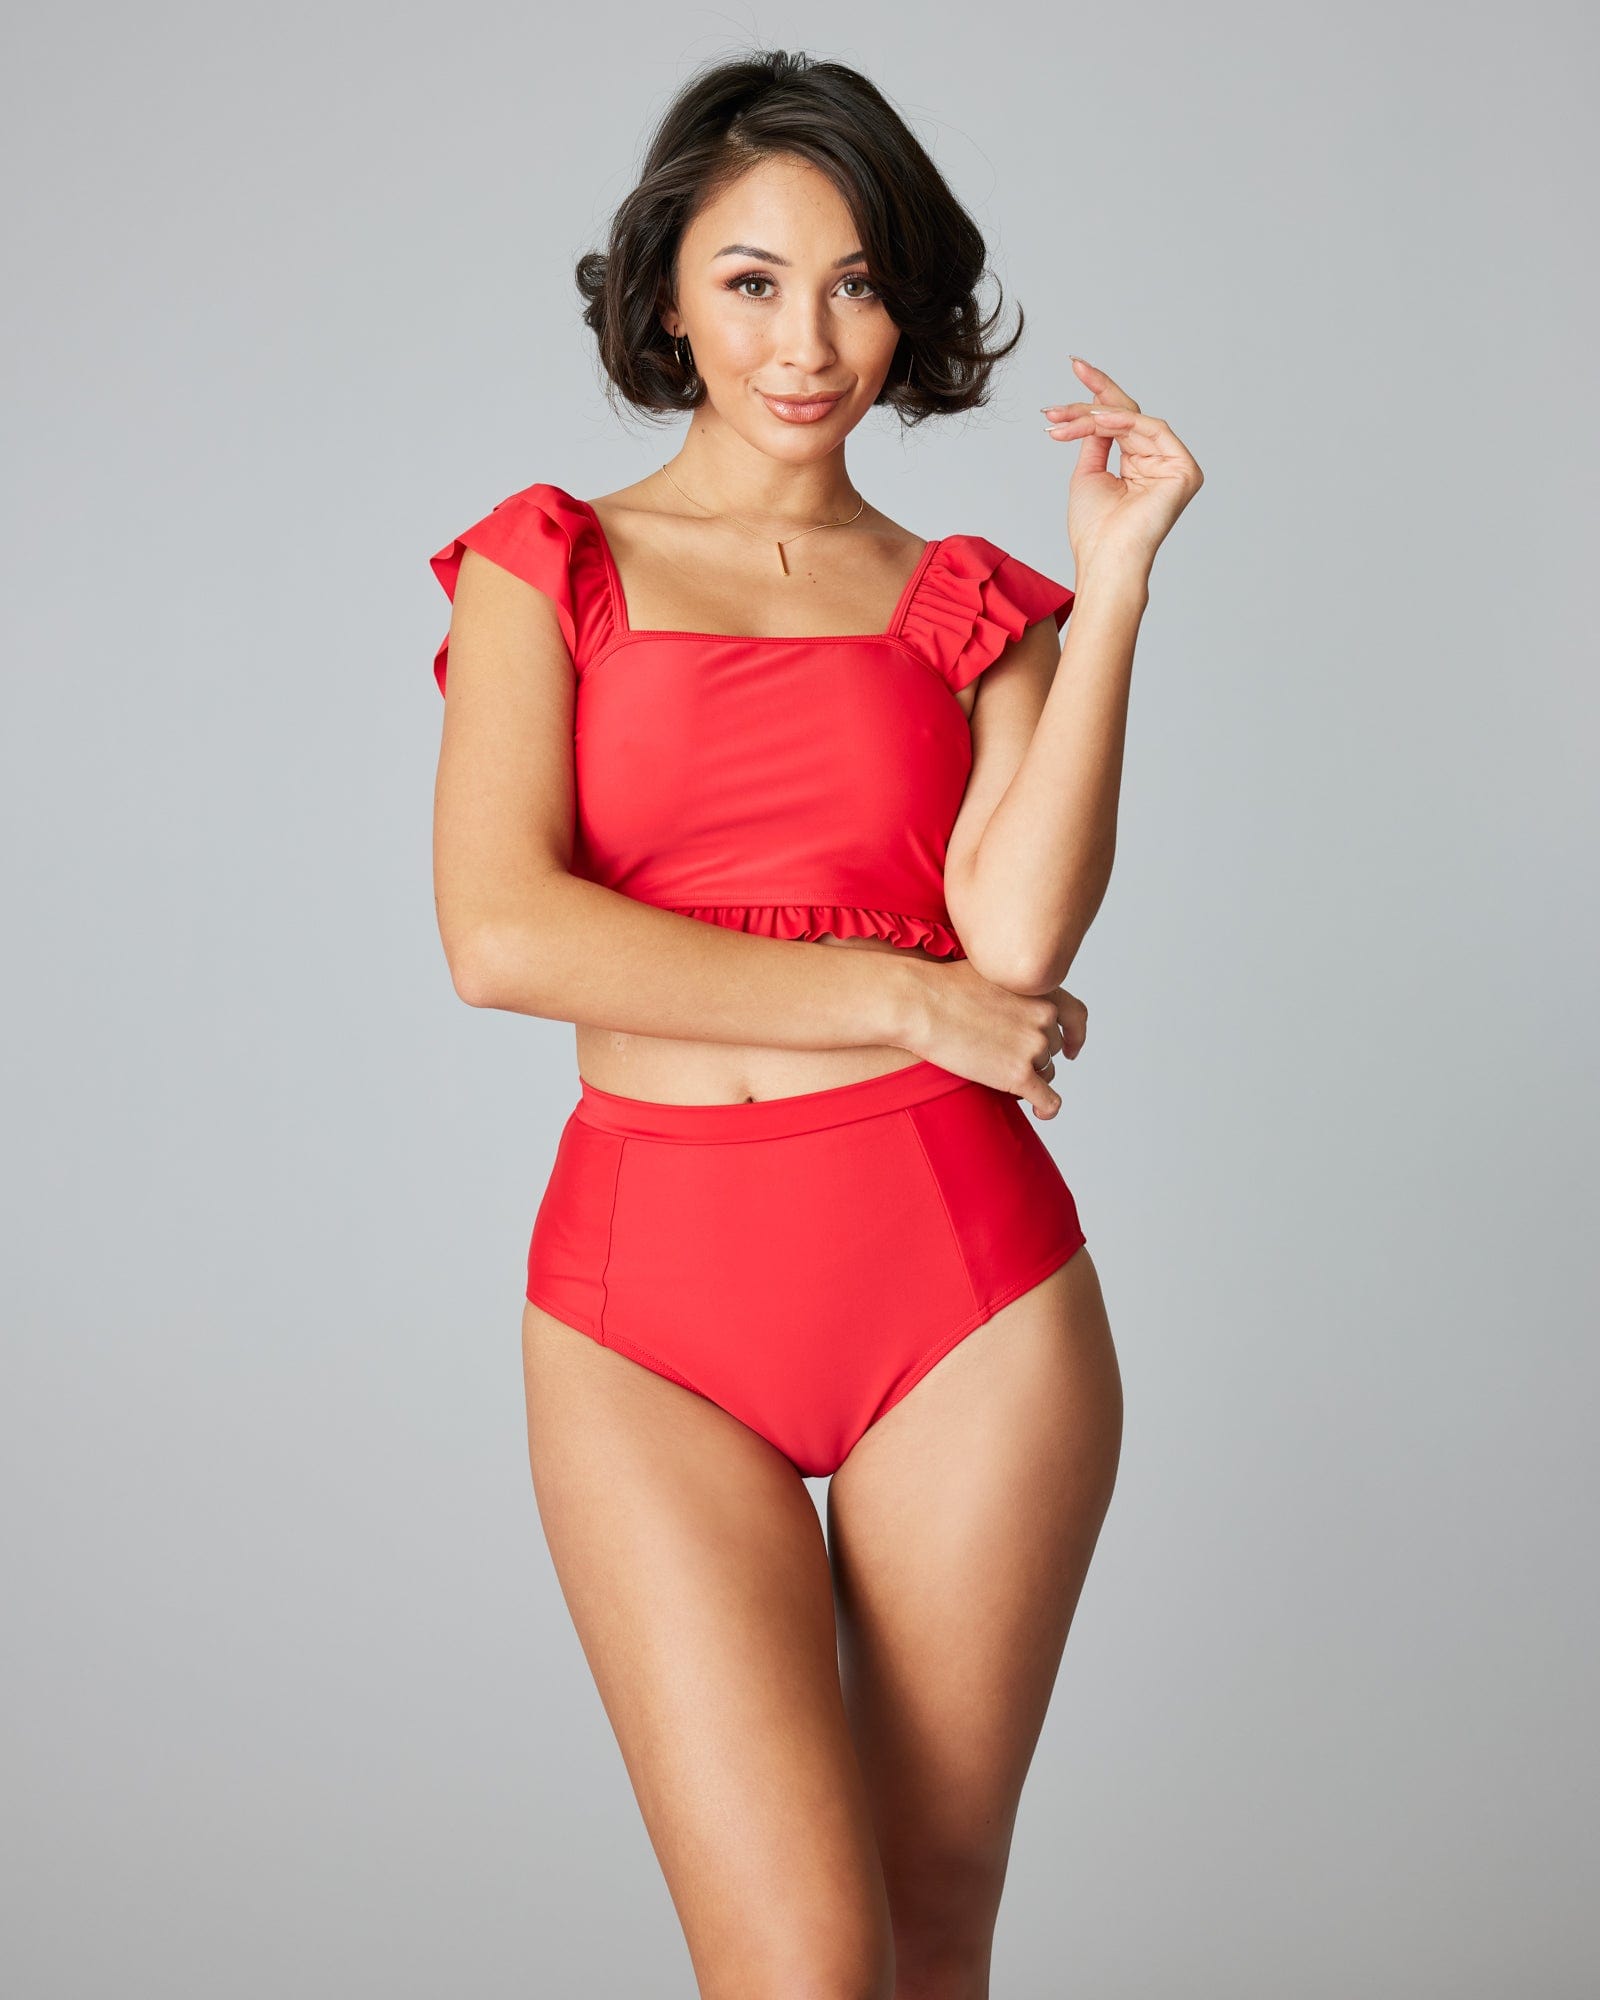 Woman in a two-piece swimsuit with a red top.